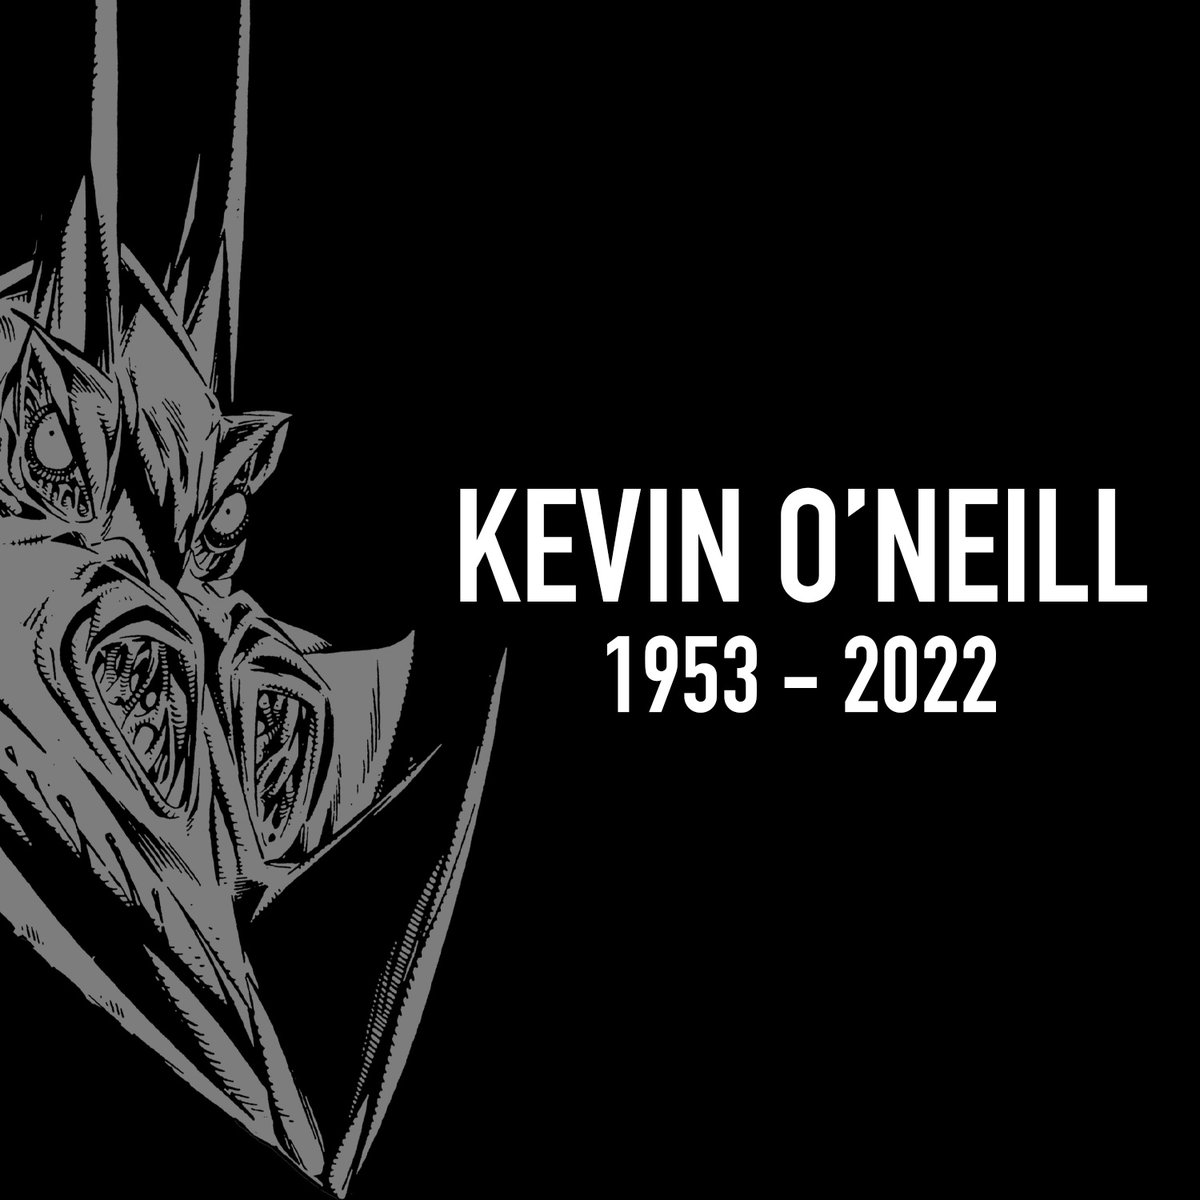 Everyone at 2000 AD is devastated to learn of the death of artist Kevin O’Neill. Our tribute to such an inimitable talent: bit.ly/3NRRpgw